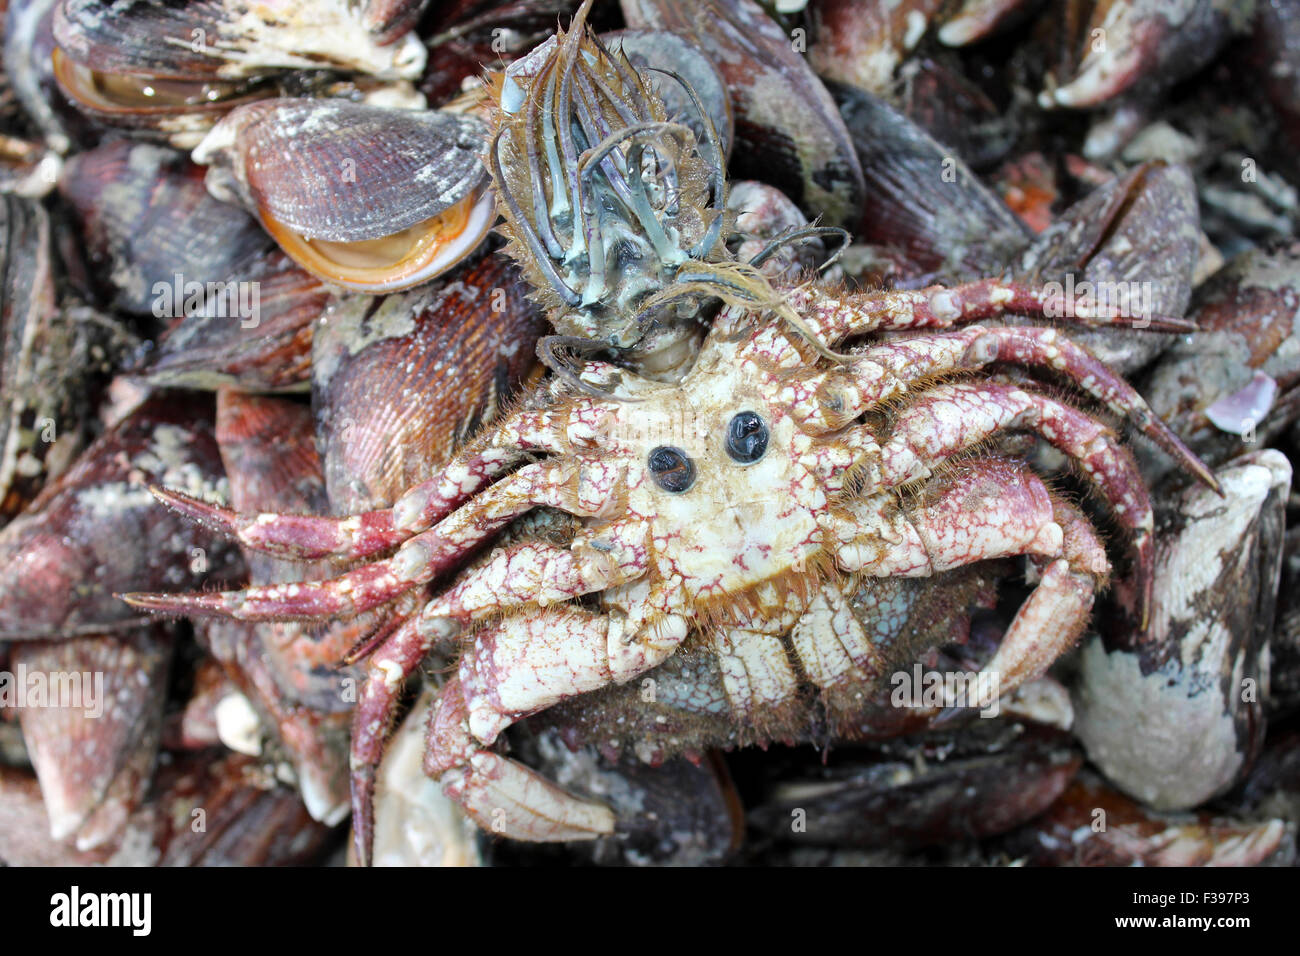 Underside On Crab with Quirky Eyes, Face & Punk Hairstyle On a Seafood Stall In Arequipa, Peru Stock Photo